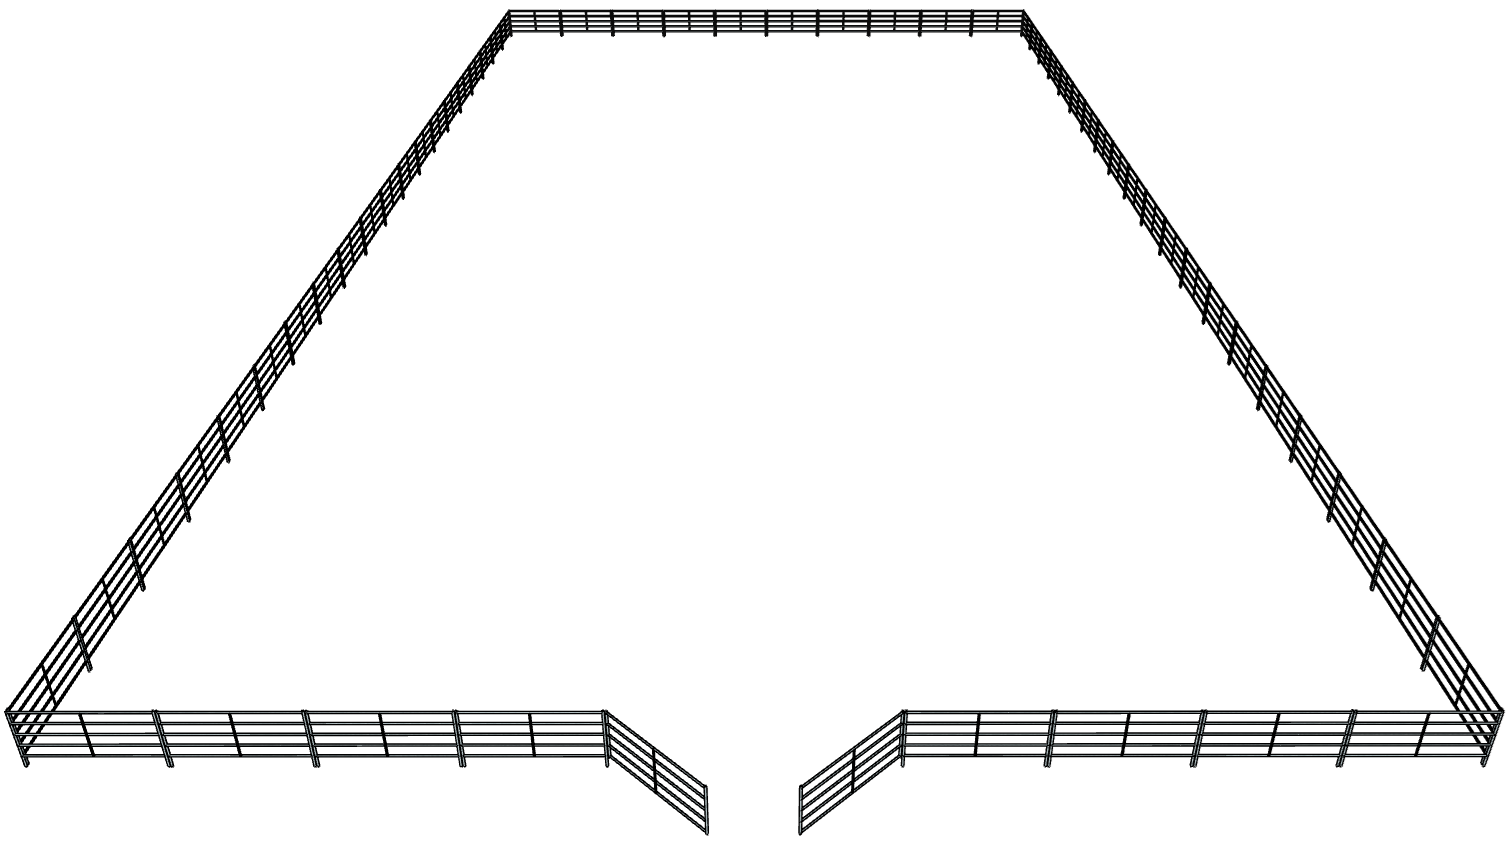 Galvanized 100 Foot by 200 Foot 5-Rail Riding Arena